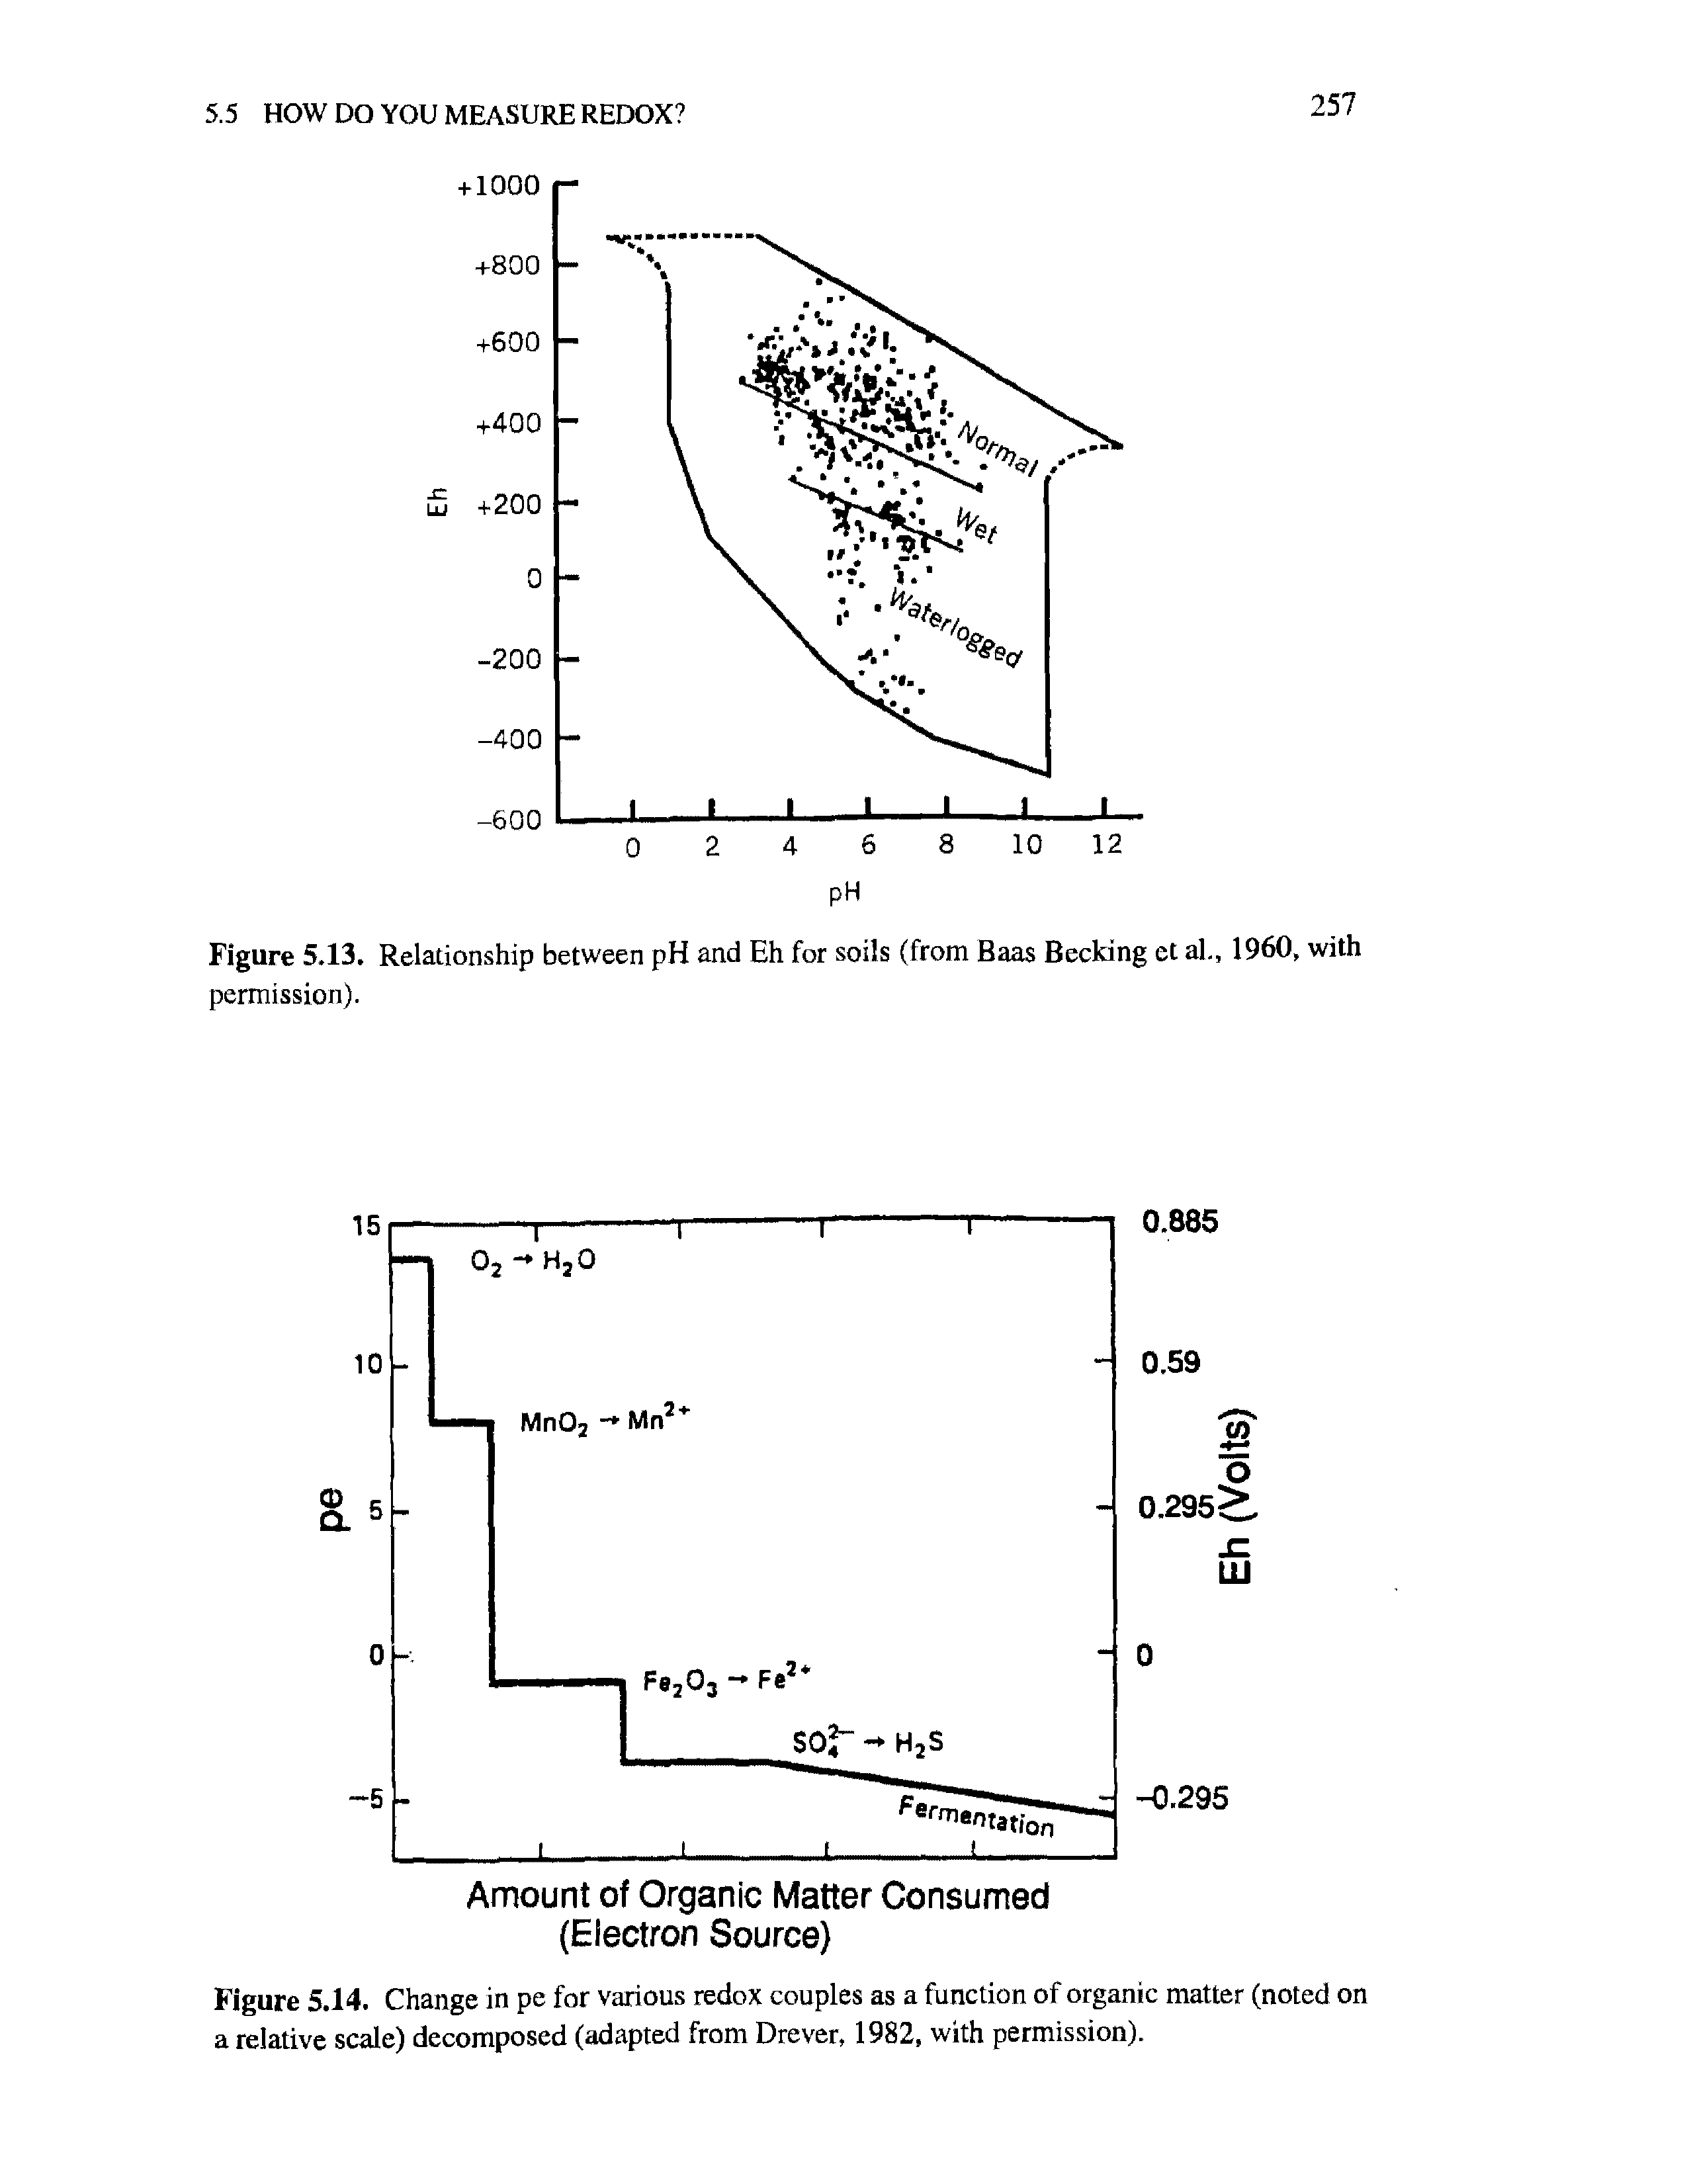 Figure 5.14. Change in pe for various redox couples as a function of organic matter (noted on a relative scale) decomposed (adapted from Drever, 1982, with permission).